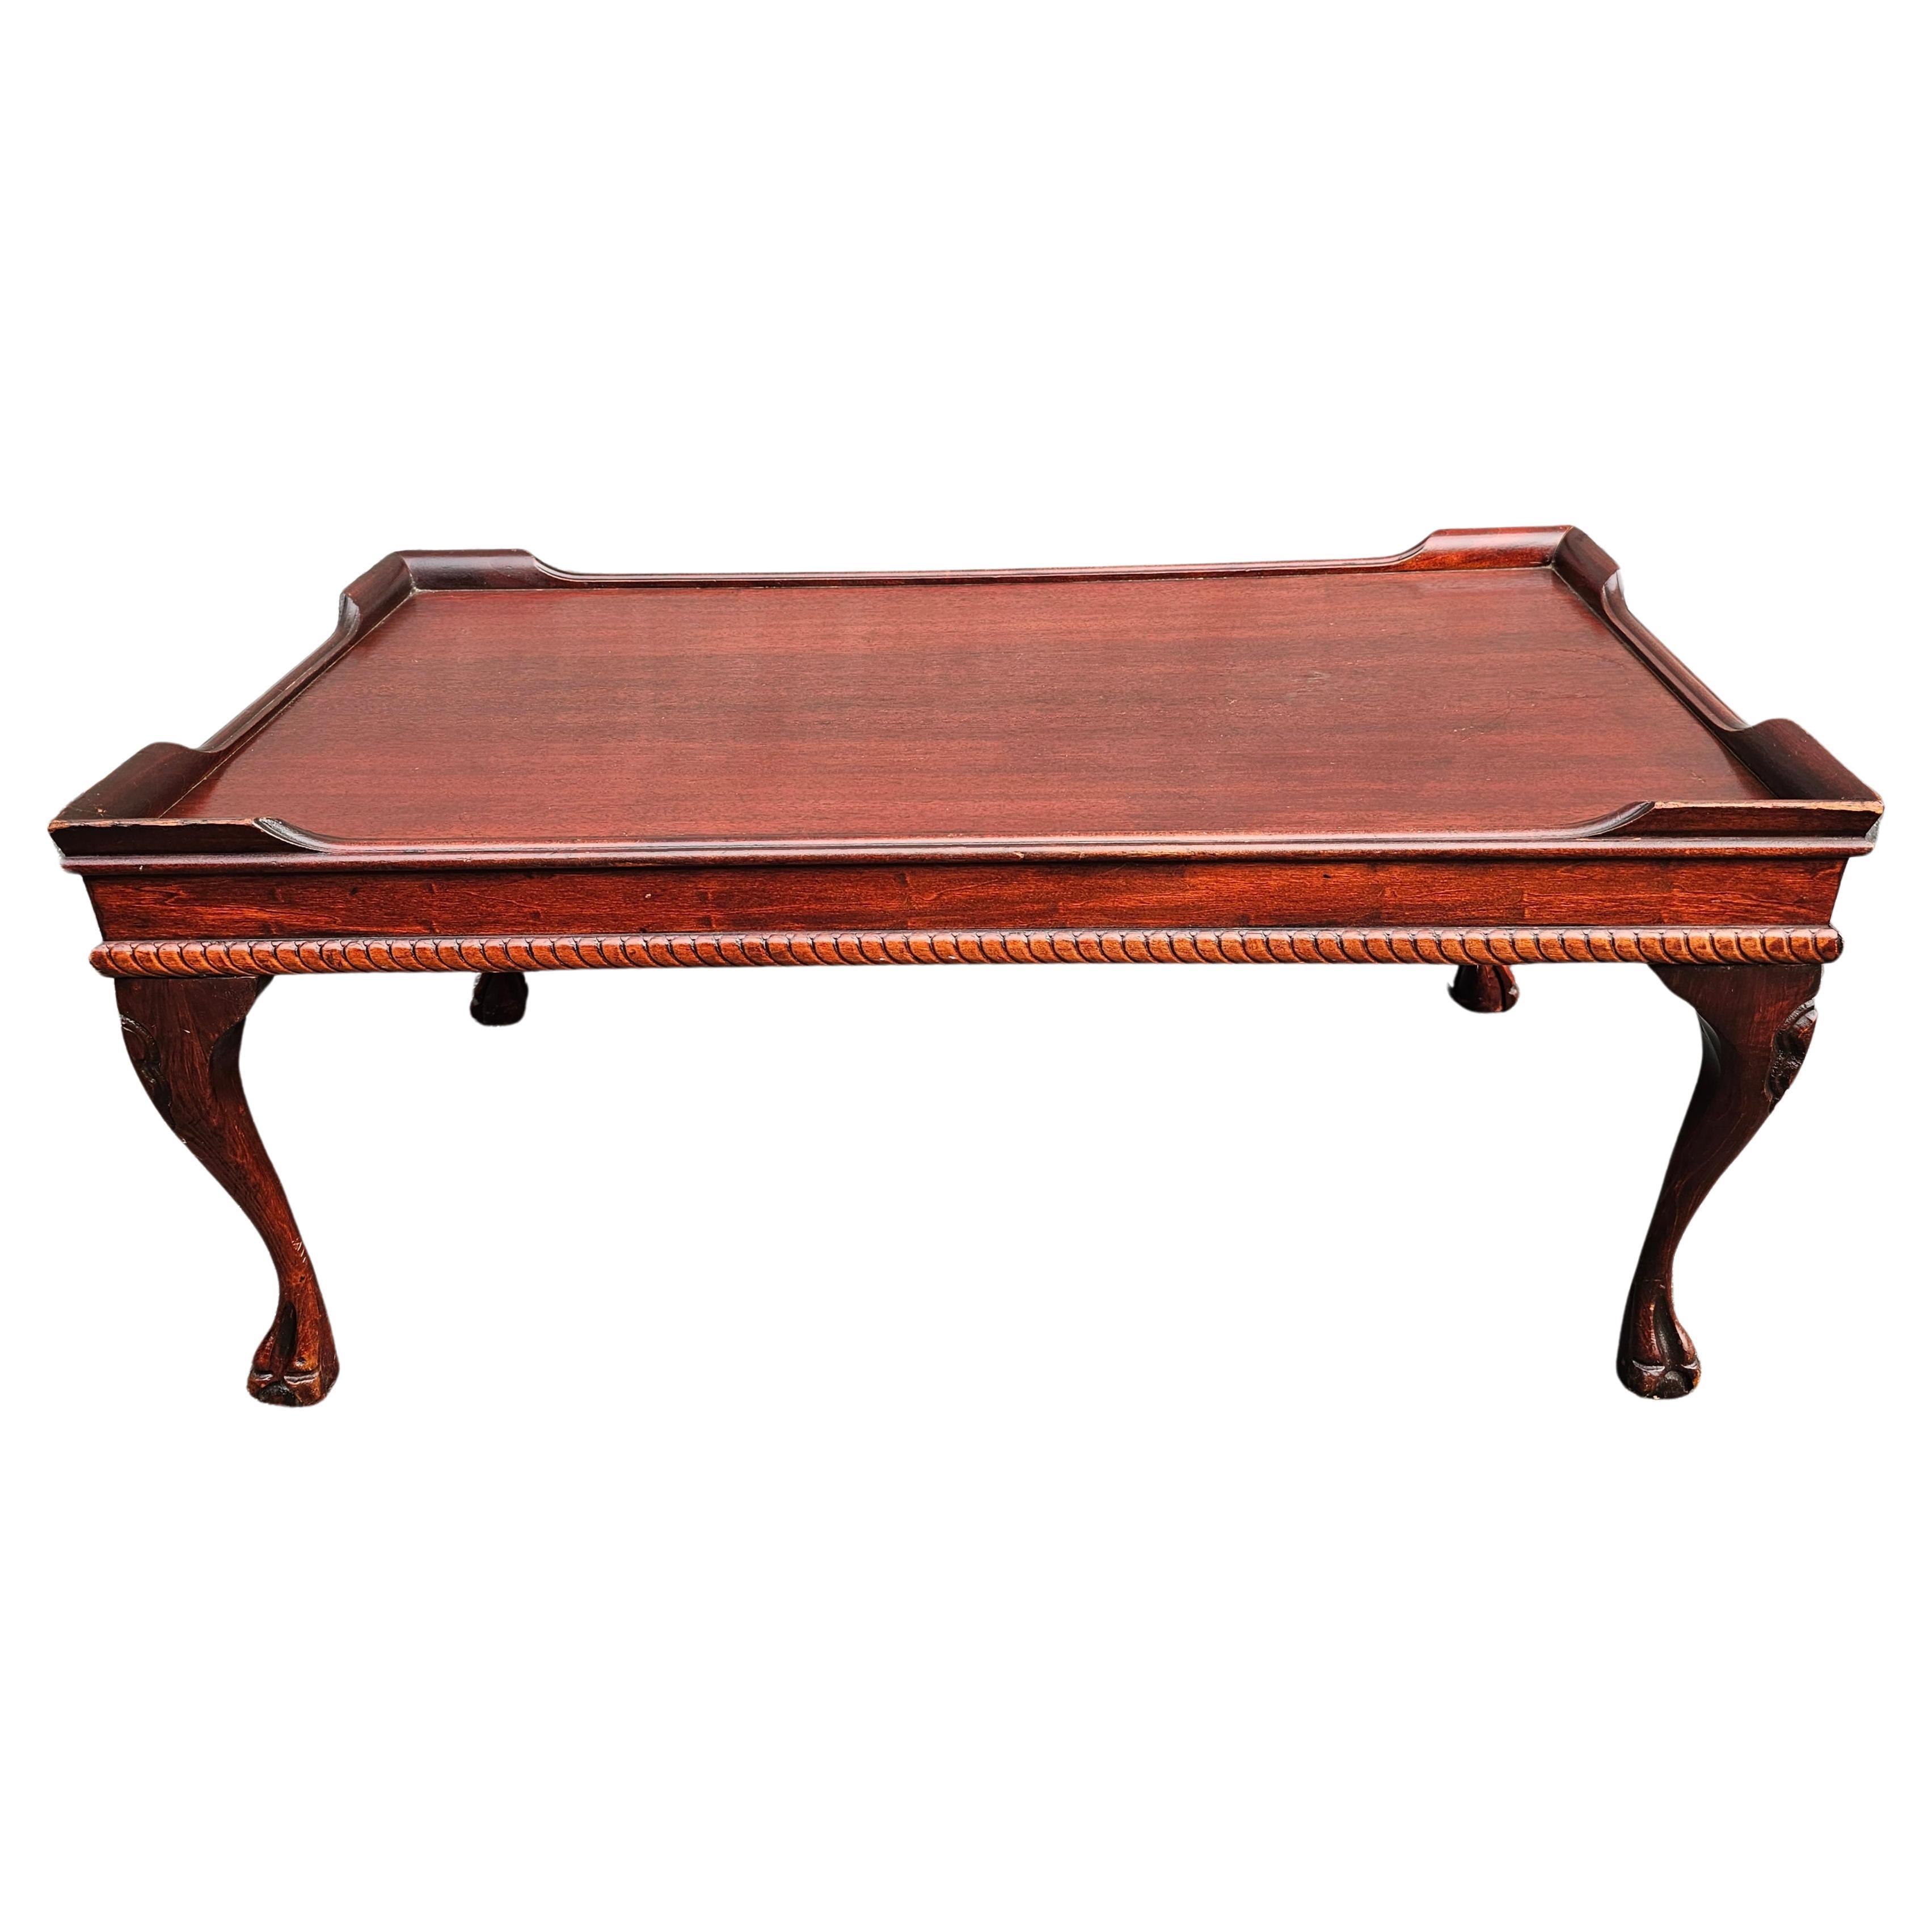 A Mid-Century Chippendale Style Mahogany coffee or cocktail Table with corner galleries. 
Light weight Solid mahogany. Measure 37